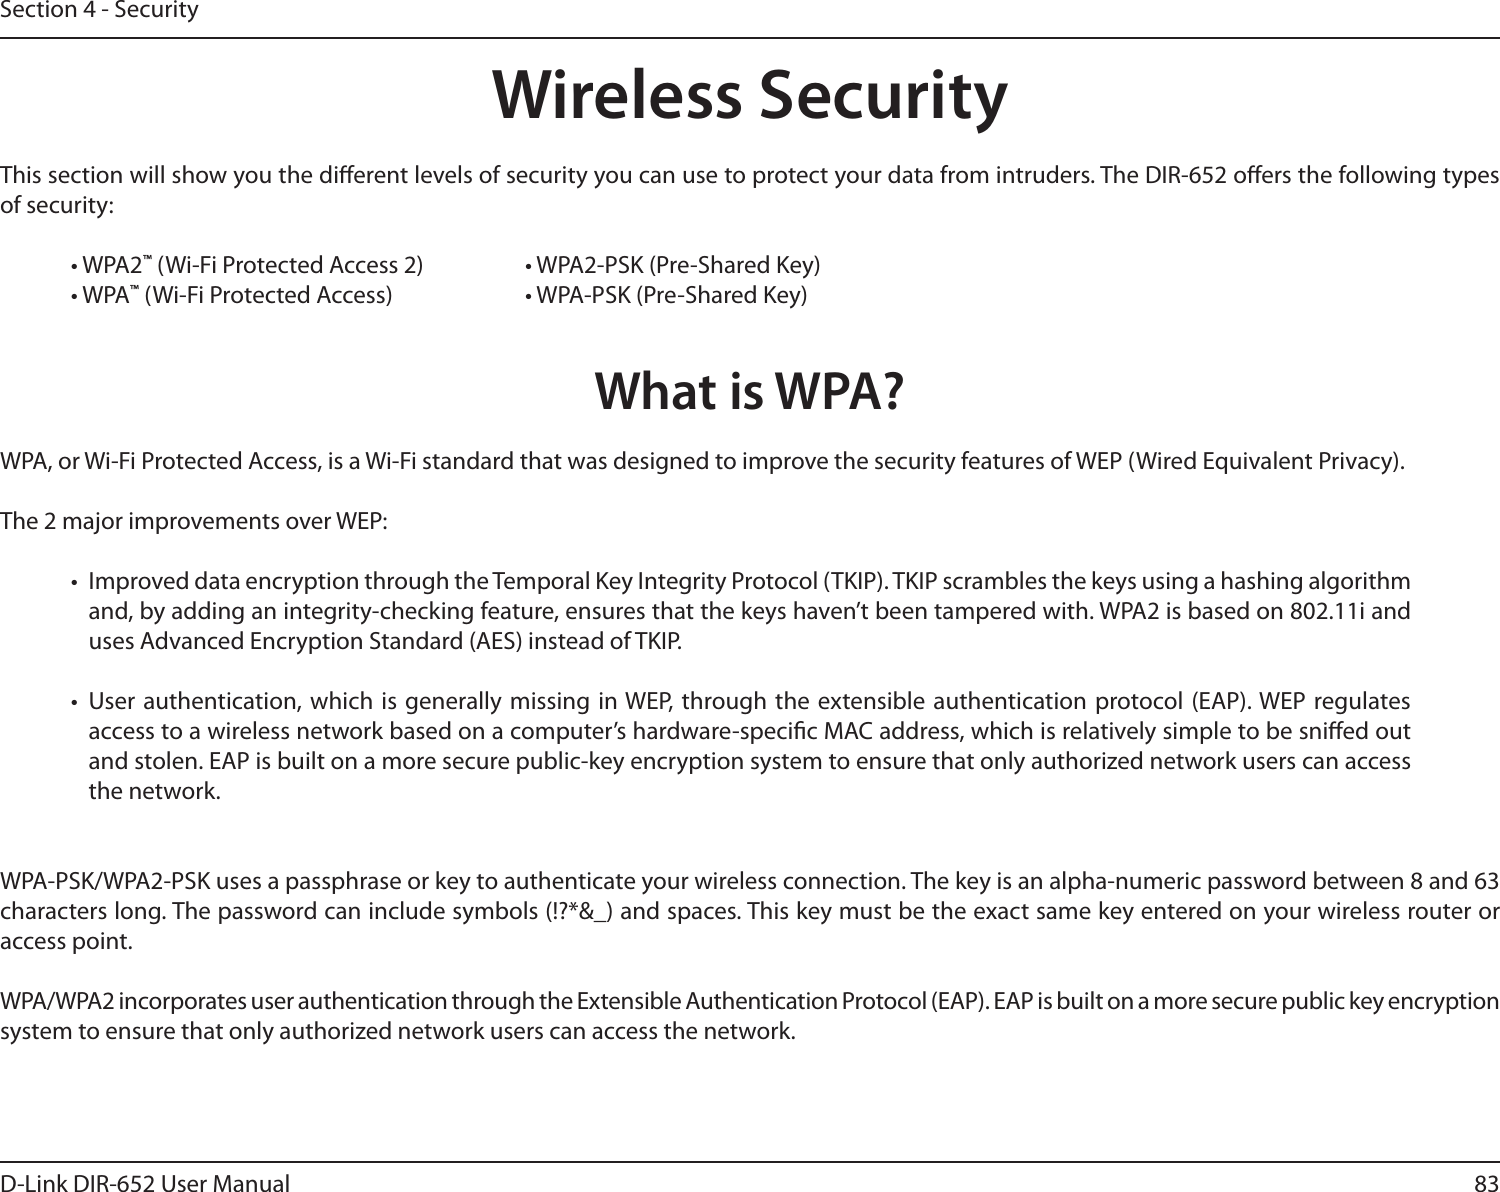 83D-Link DIR-652 User ManualSection 4 - SecurityWireless SecurityThis section will show you the dierent levels of security you can use to protect your data from intruders. The DIR-652 oers the following types of security:• WPA2™ (Wi-Fi Protected Access 2)     • WPA2-PSK (Pre-Shared Key)• WPA™ (Wi-Fi Protected Access)    • WPA-PSK (Pre-Shared Key)What is WPA?WPA, or Wi-Fi Protected Access, is a Wi-Fi standard that was designed to improve the security features of WEP (Wired Equivalent Privacy).  The 2 major improvements over WEP: •  Improved data encryption through the Temporal Key Integrity Protocol (TKIP). TKIP scrambles the keys using a hashing algorithm and, by adding an integrity-checking feature, ensures that the keys haven’t been tampered with. WPA2 is based on 802.11i and uses Advanced Encryption Standard (AES) instead of TKIP.•  User authentication,  which  is  generally  missing  in WEP, through the  extensible authentication protocol (EAP). WEP  regulates access to a wireless network based on a computer’s hardware-specic MAC address, which is relatively simple to be snied out and stolen. EAP is built on a more secure public-key encryption system to ensure that only authorized network users can access the network.WPA-PSK/WPA2-PSK uses a passphrase or key to authenticate your wireless connection. The key is an alpha-numeric password between 8 and 63 characters long. The password can include symbols (!?*&amp;_) and spaces. This key must be the exact same key entered on your wireless router or access point.WPA/WPA2 incorporates user authentication through the Extensible Authentication Protocol (EAP). EAP is built on a more secure public key encryption system to ensure that only authorized network users can access the network.